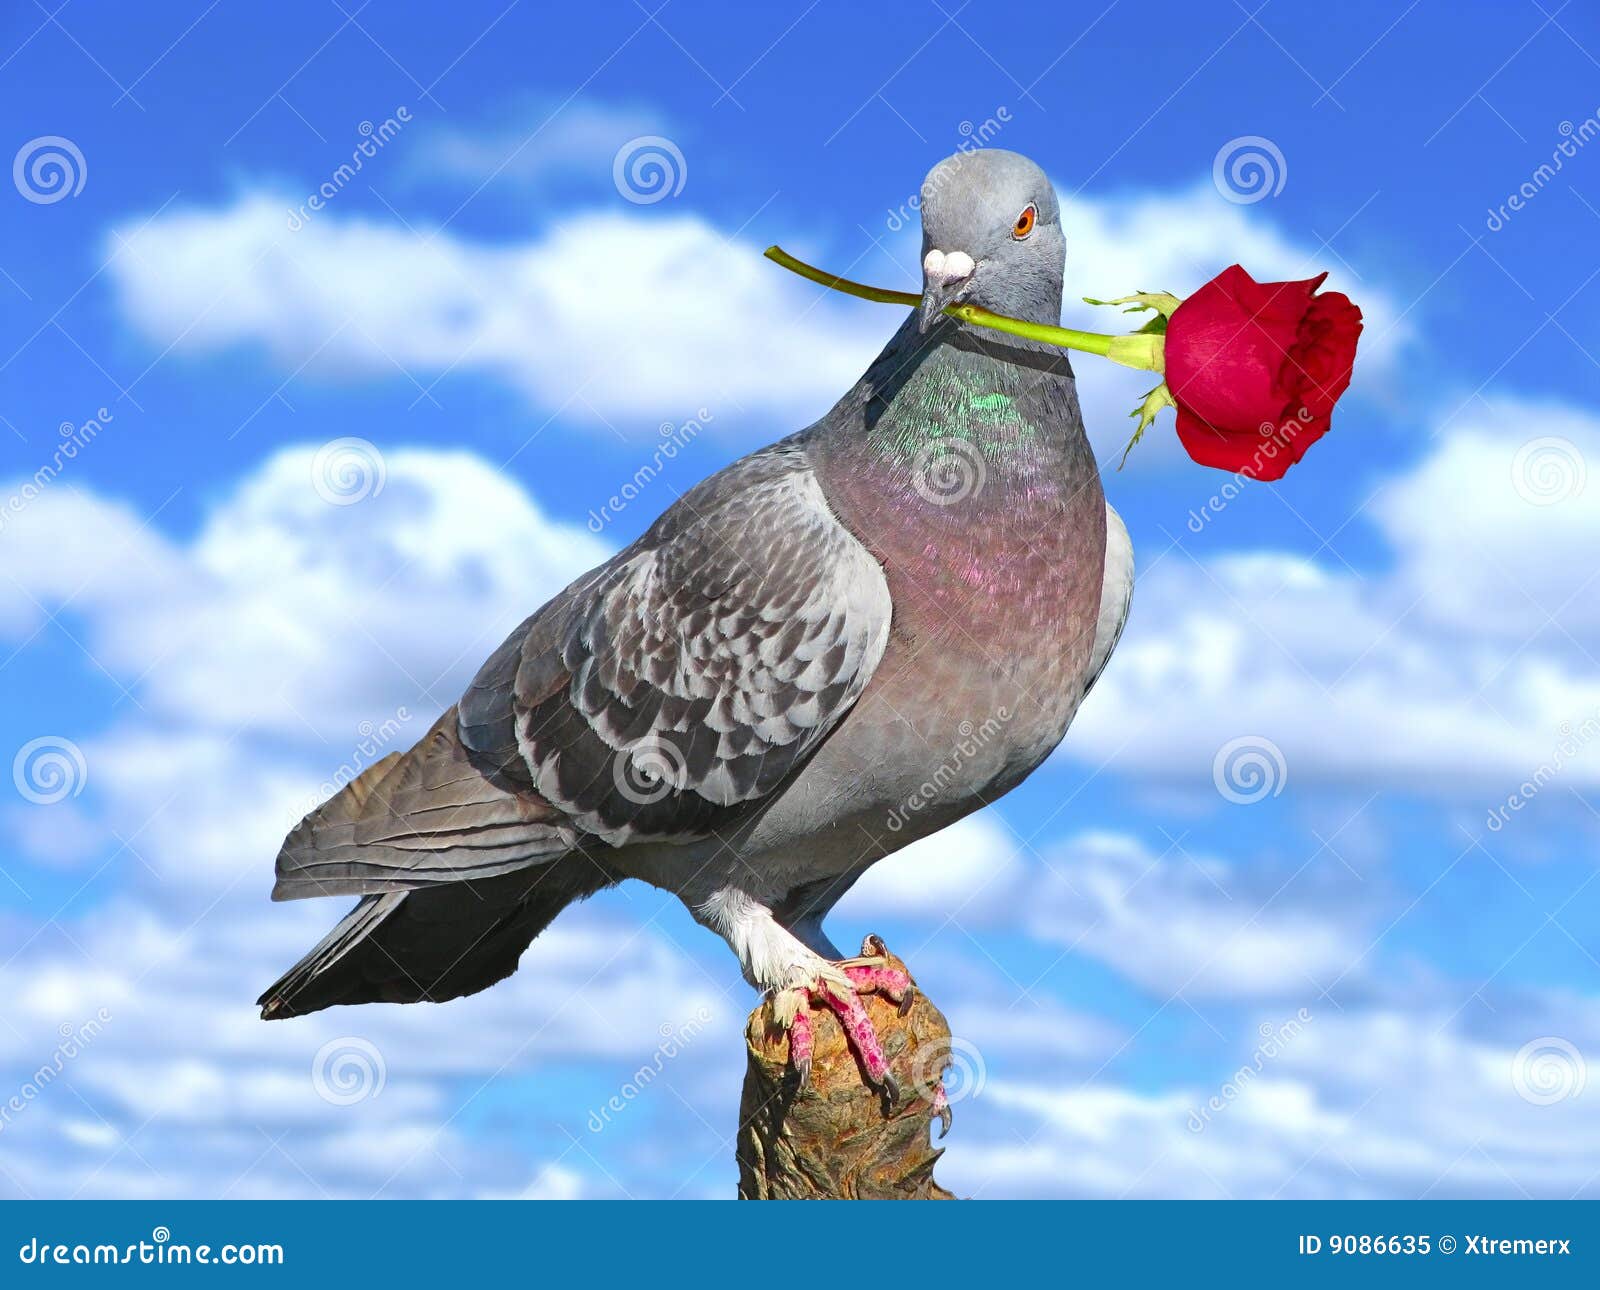 pigeon with red rose.